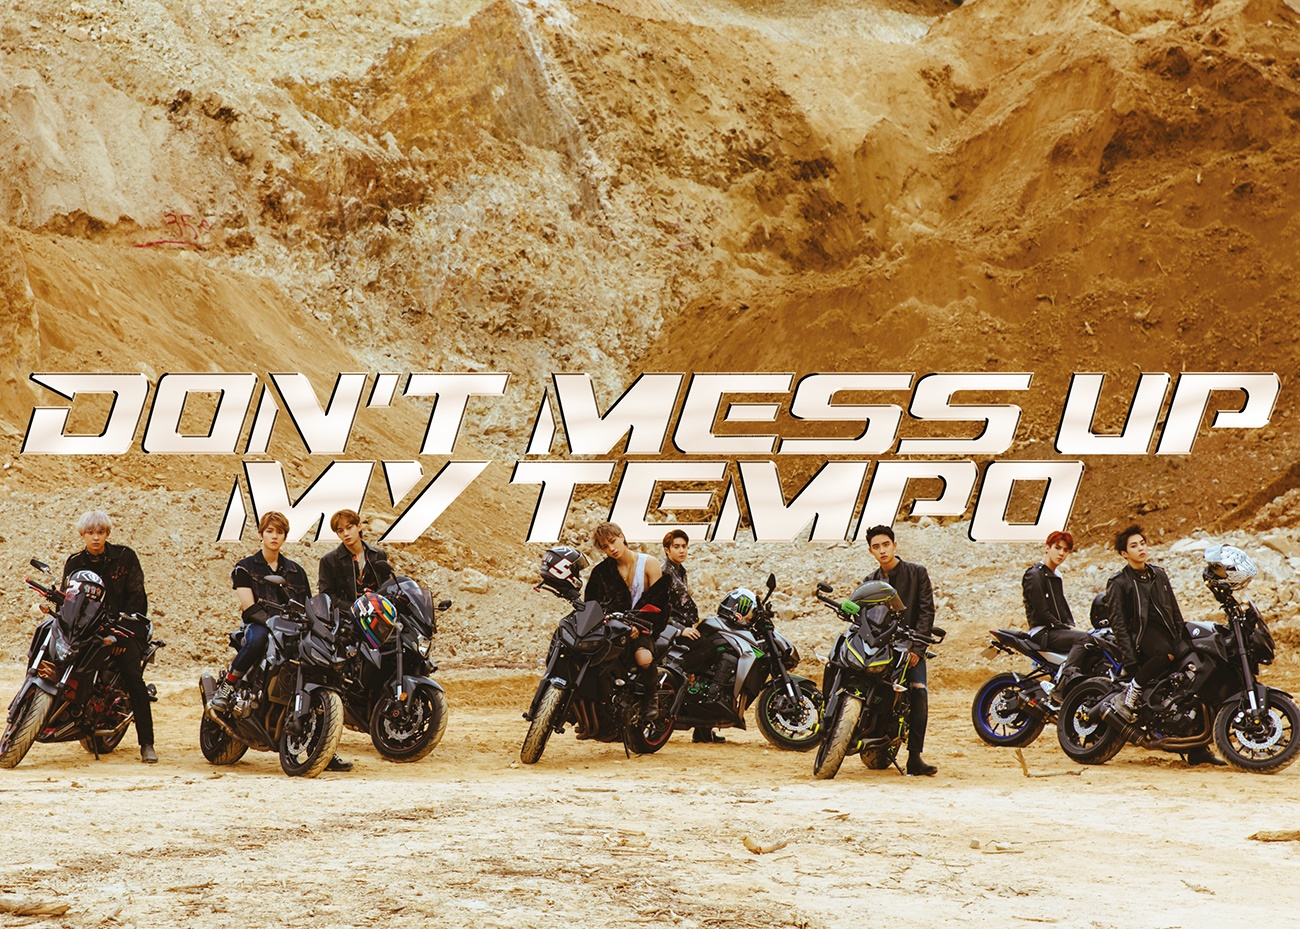 EXO "DON’T MESS UP MY TEMPO"